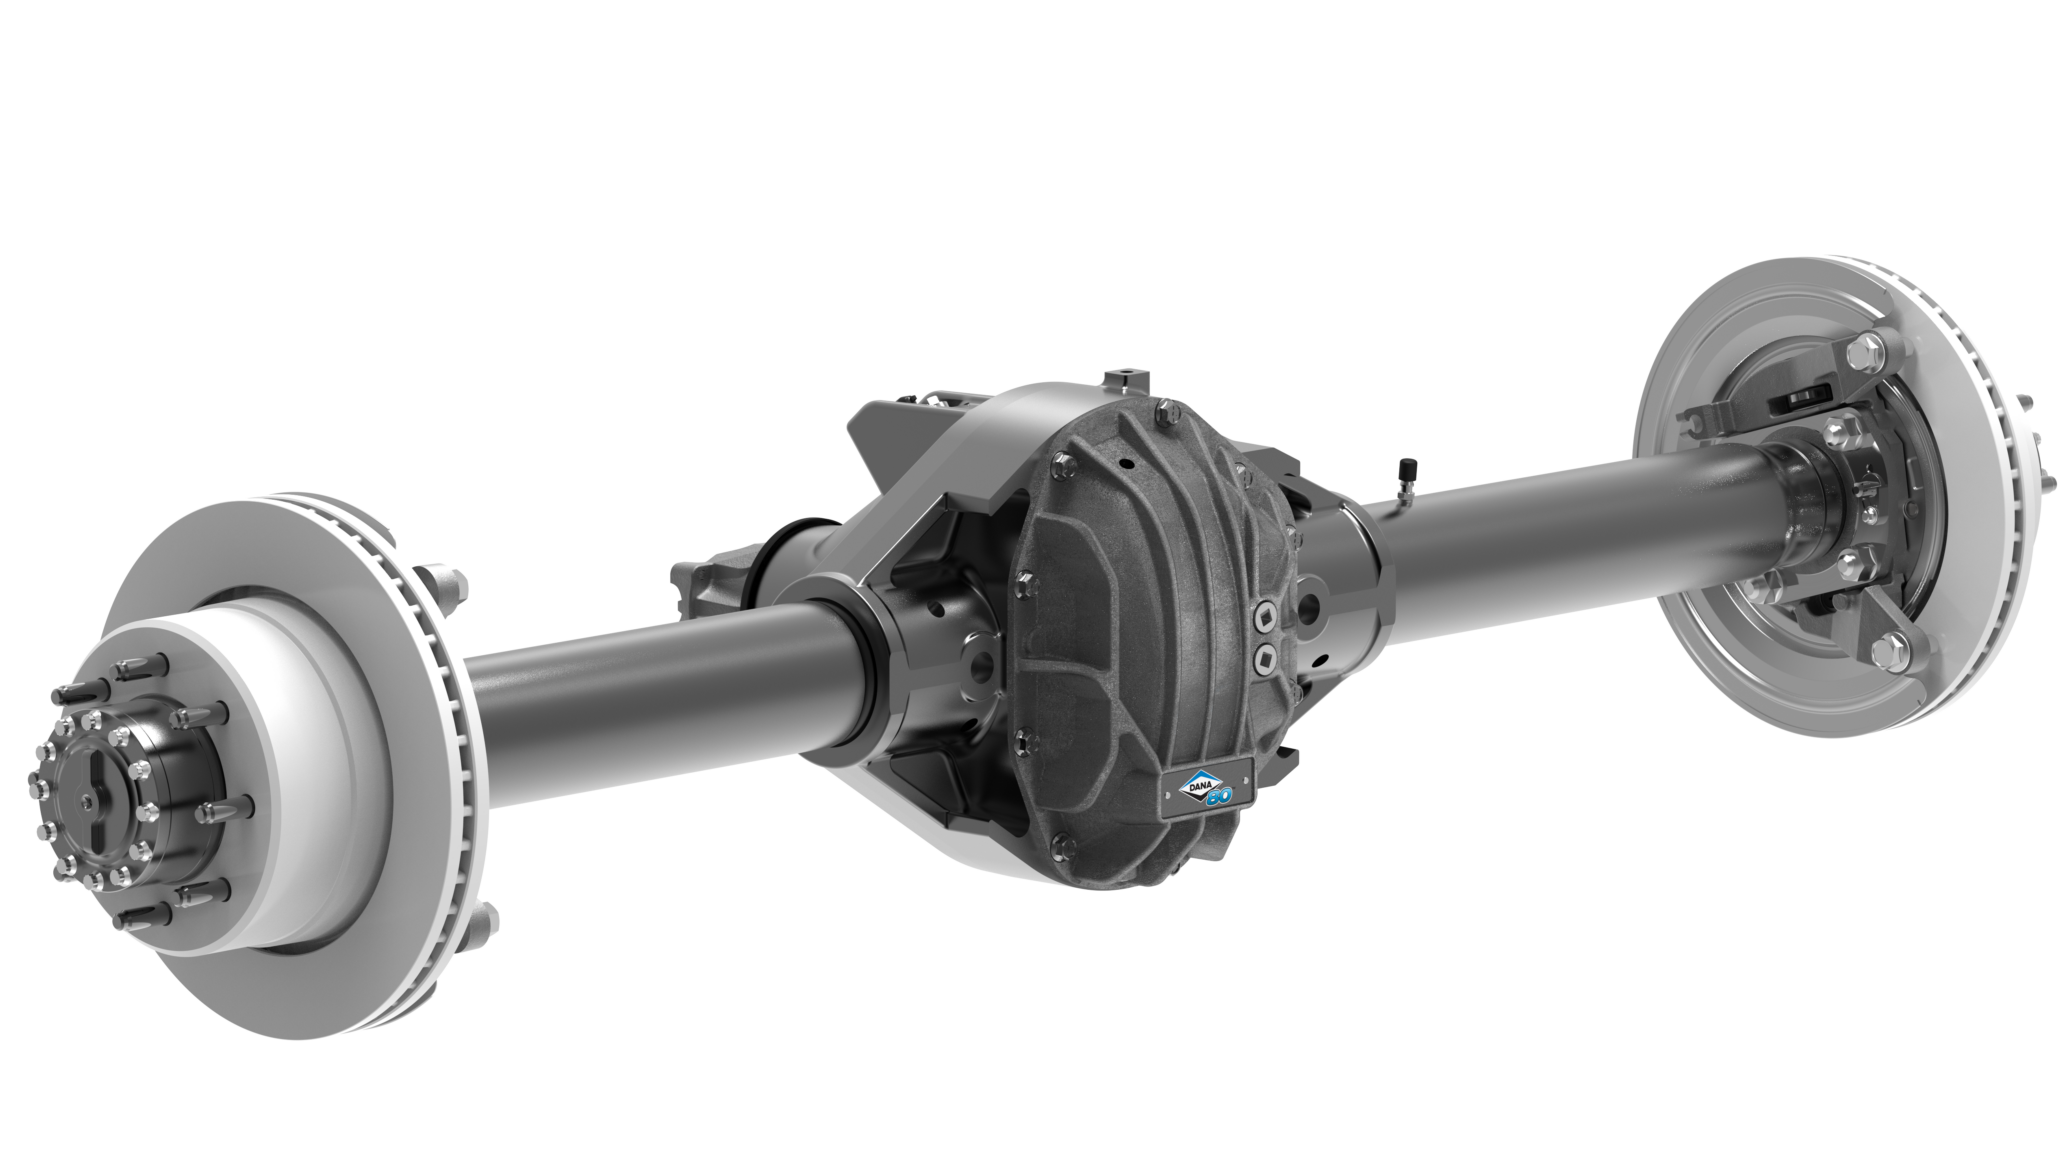 Dana Incorporated has introduced the new Ultimate Dana 80 bracketless crate axles that allow for easy installation on virtually any application.  